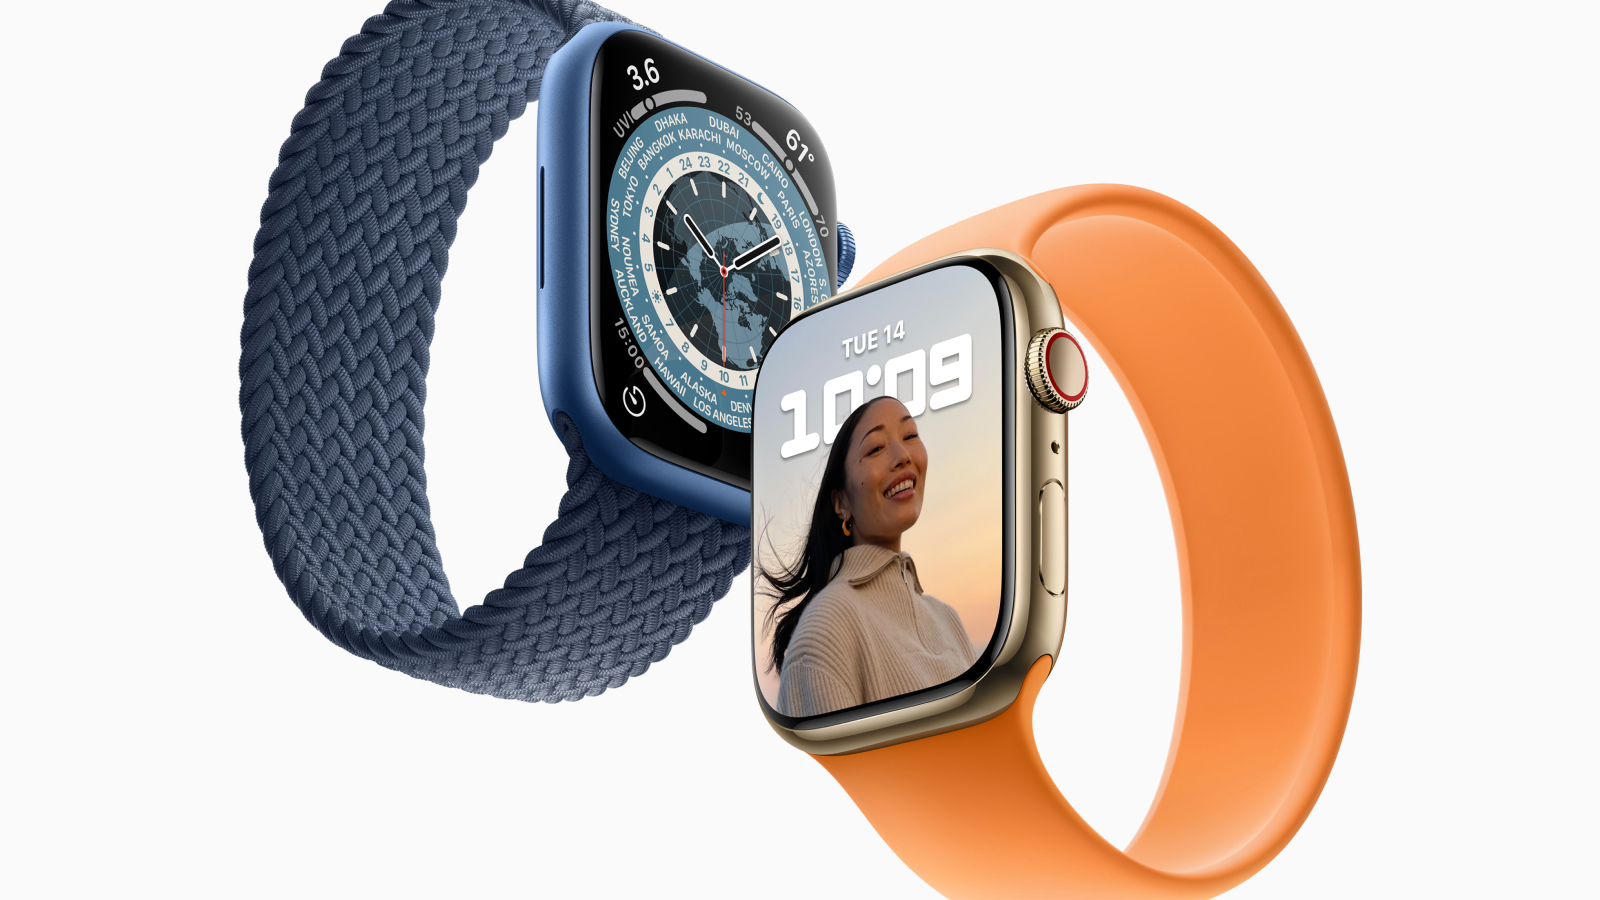 Solo Loop Now Available in Smaller Sizes for 44mm/45mm Apple Watch Models